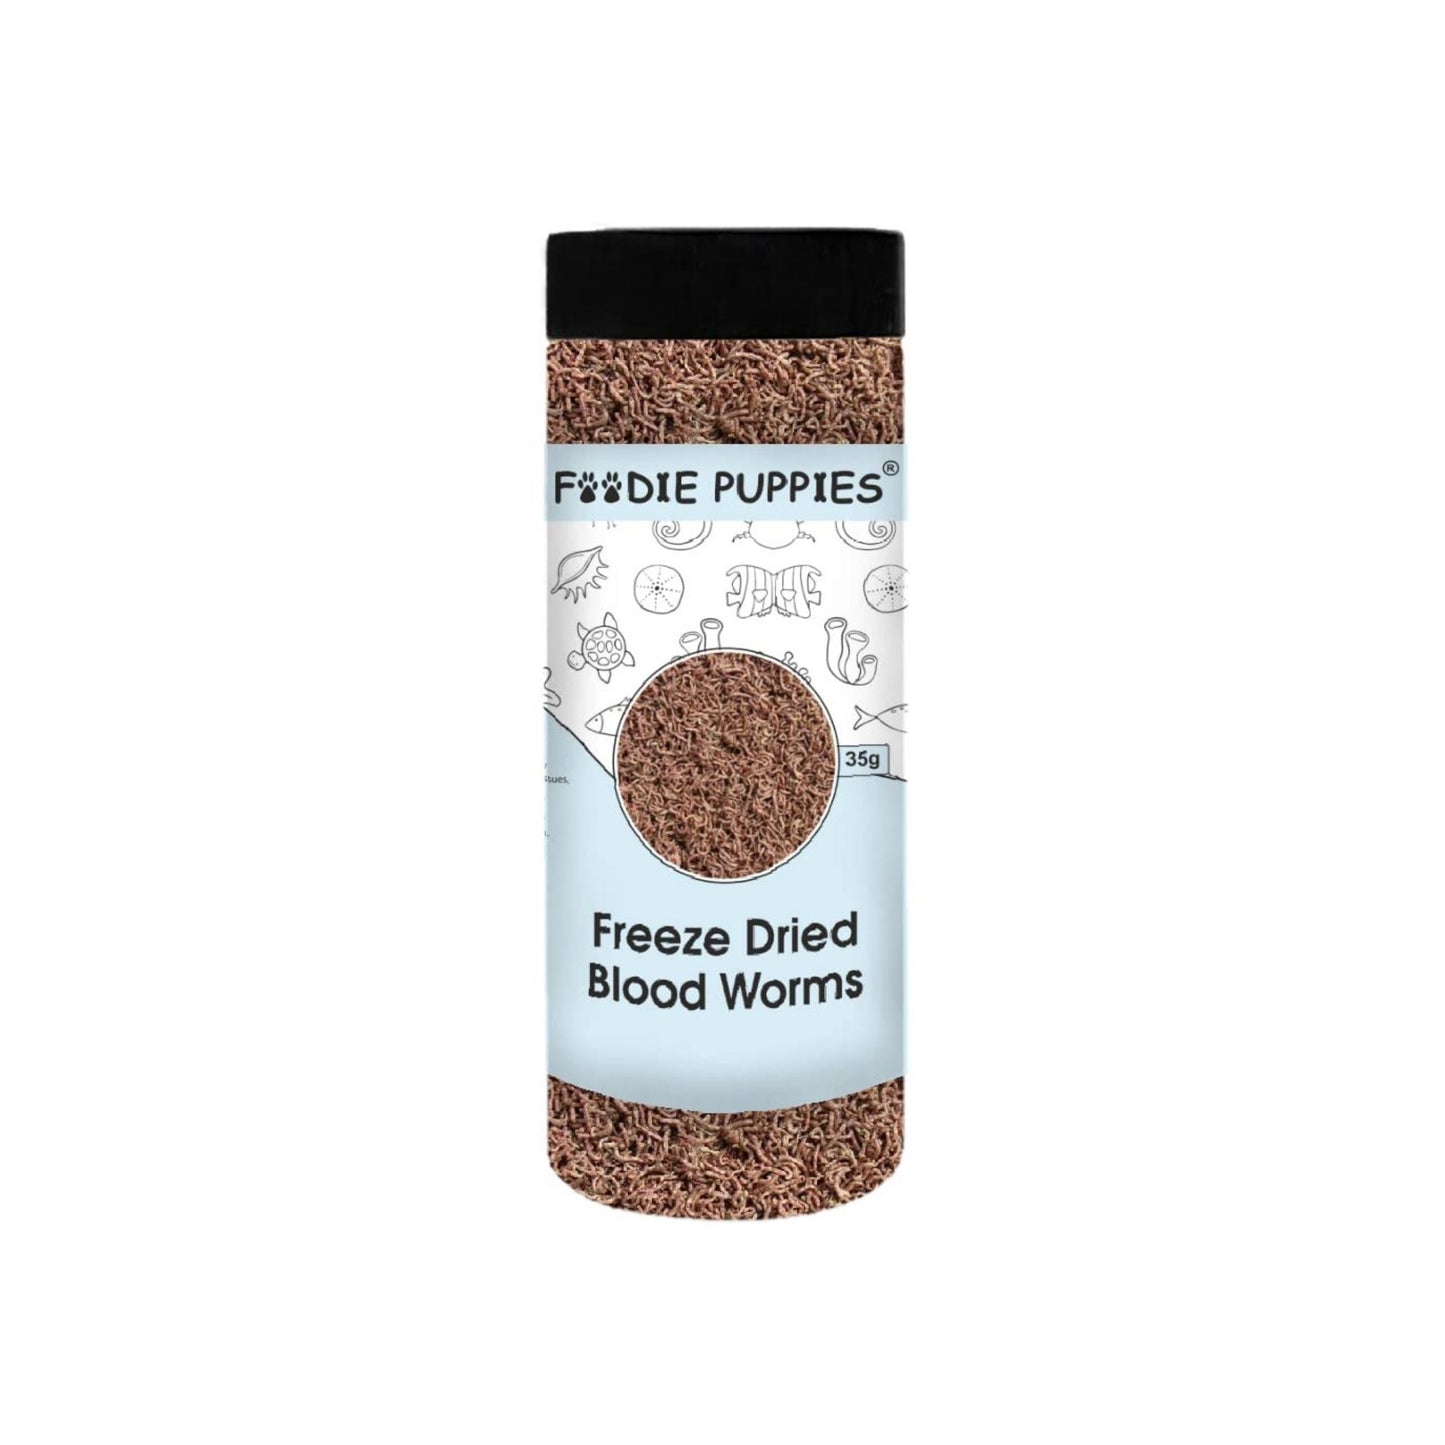 Foodie Puppies Freeze Dried Blood Worms Fish Food - 35gm